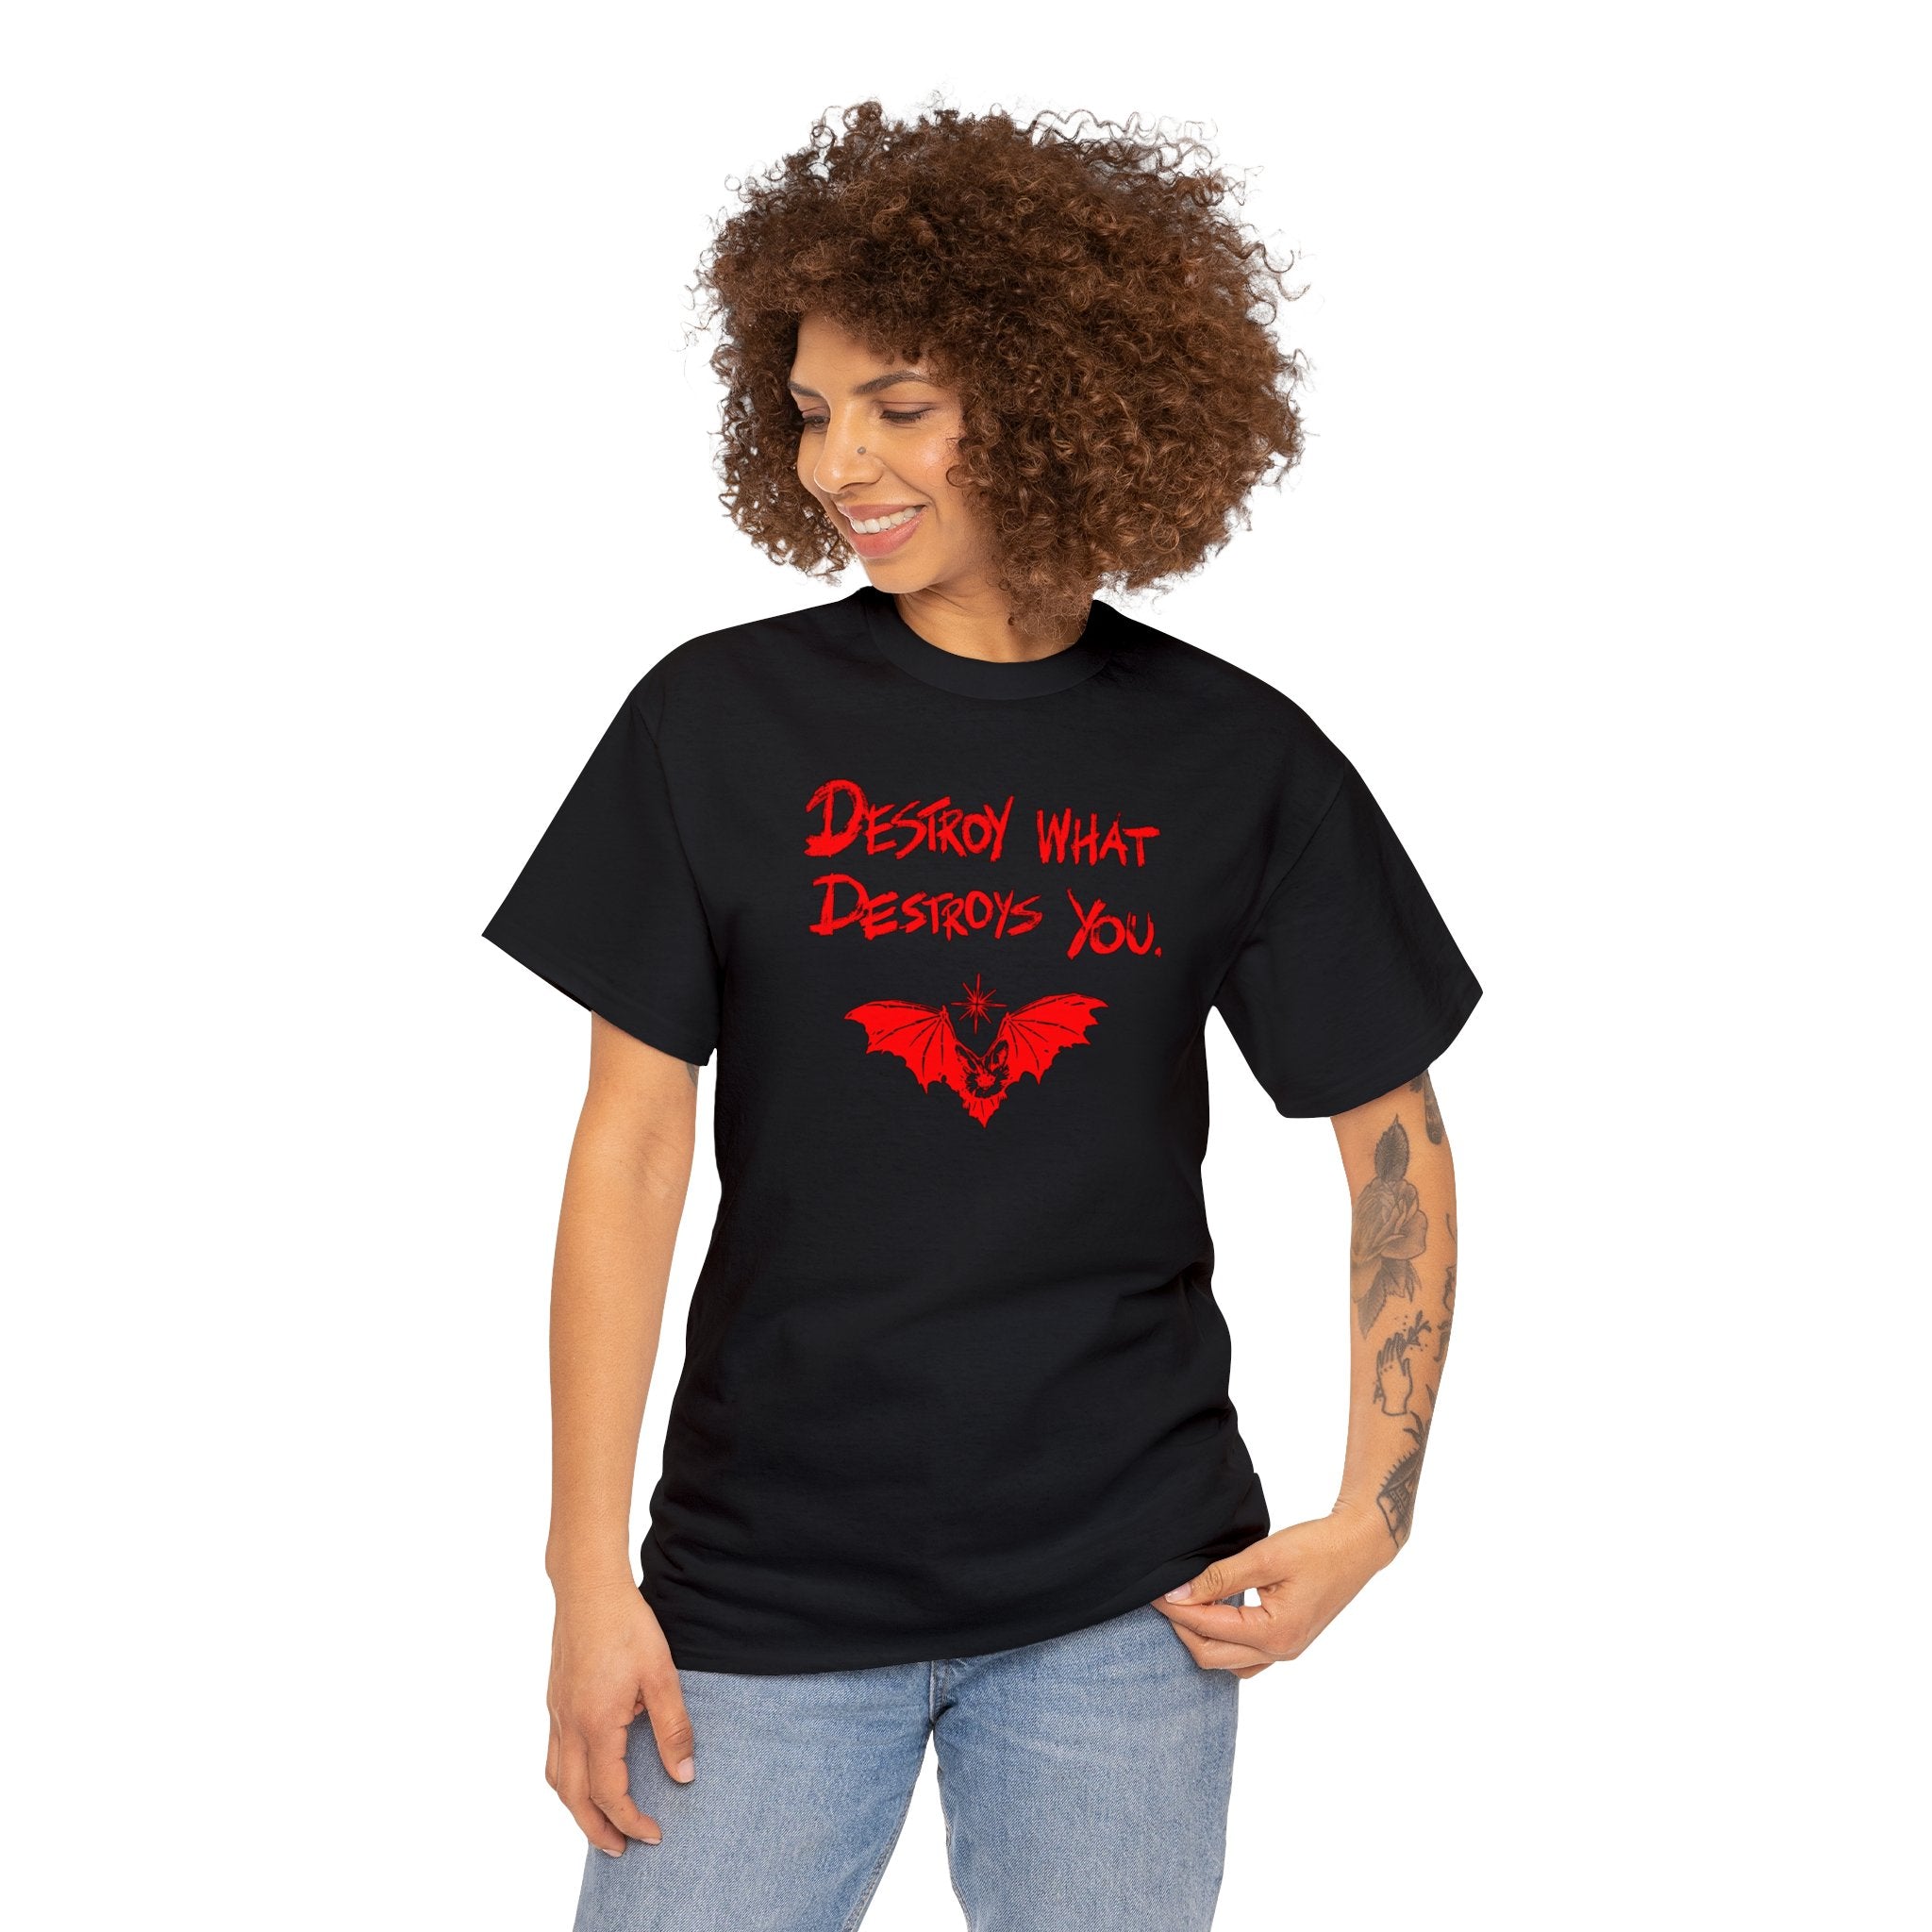 Destroy What Destroys You Tee